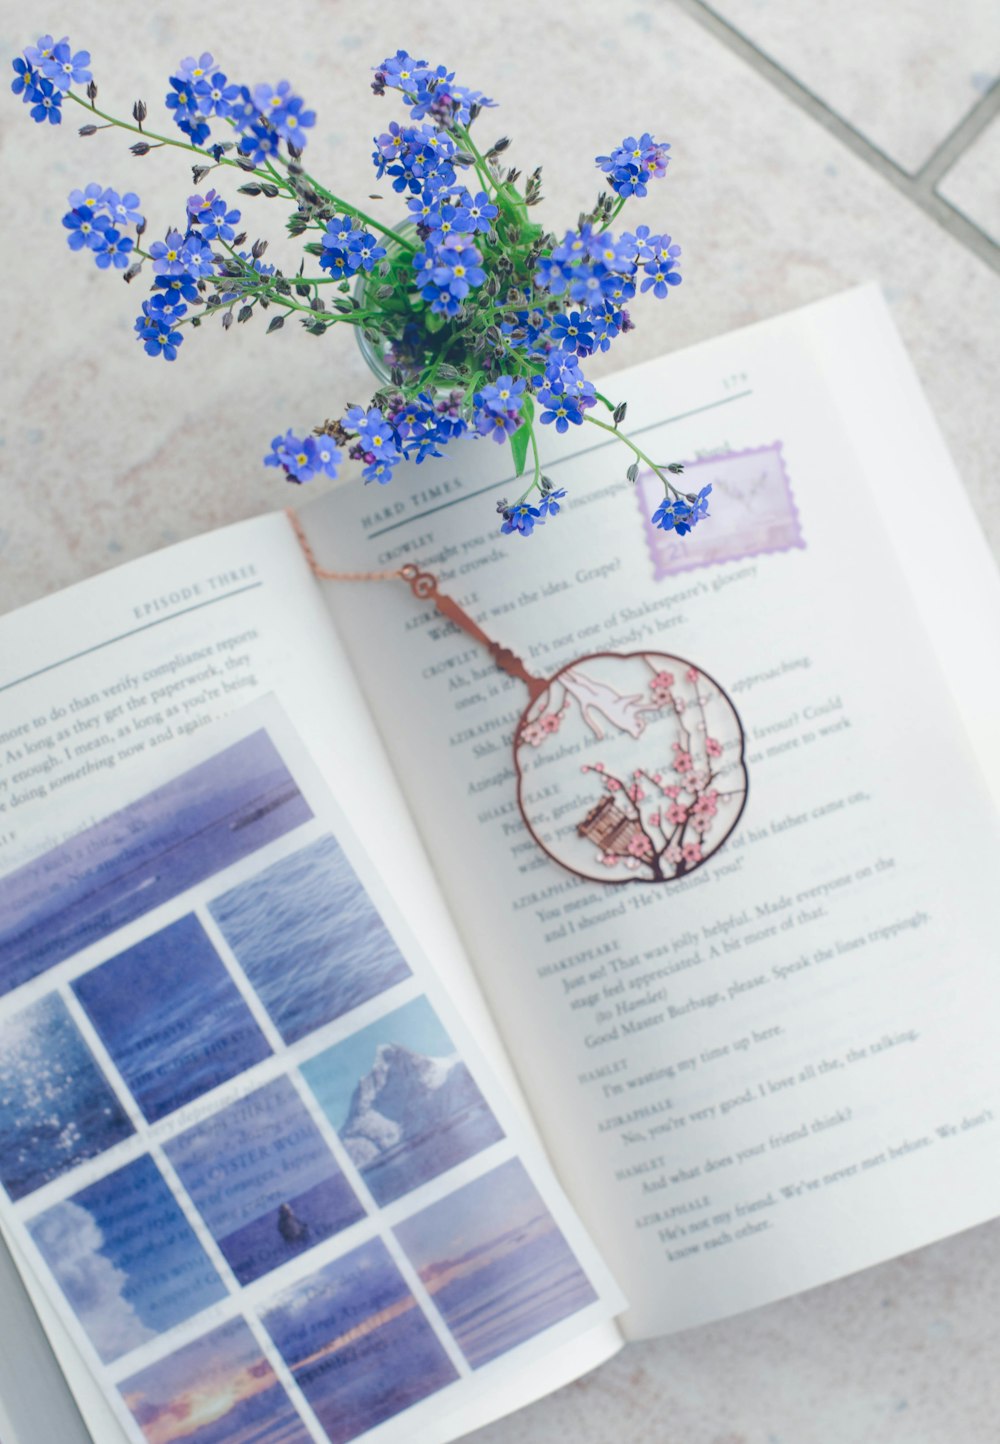 a book opened to a page with blue flowers in it